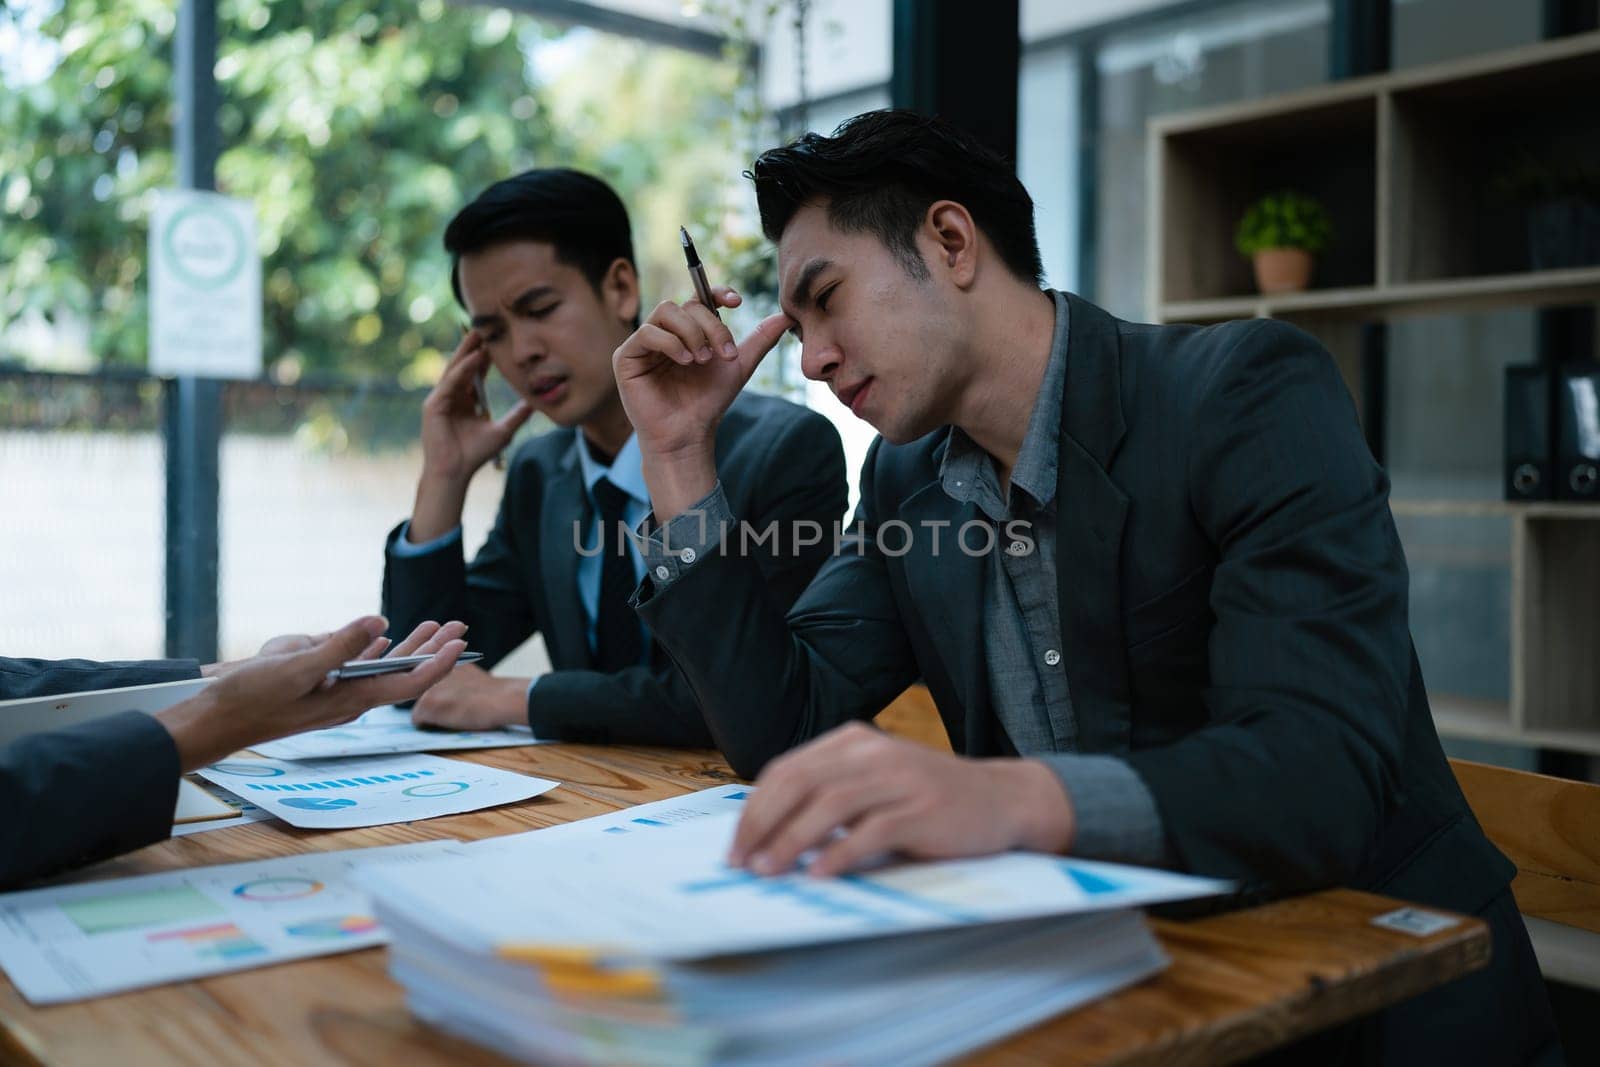 Burnout, stress and business man overworked from too much, work overload and pressure marketing corporate company. Time management, frustrated and tired employee. by Manastrong